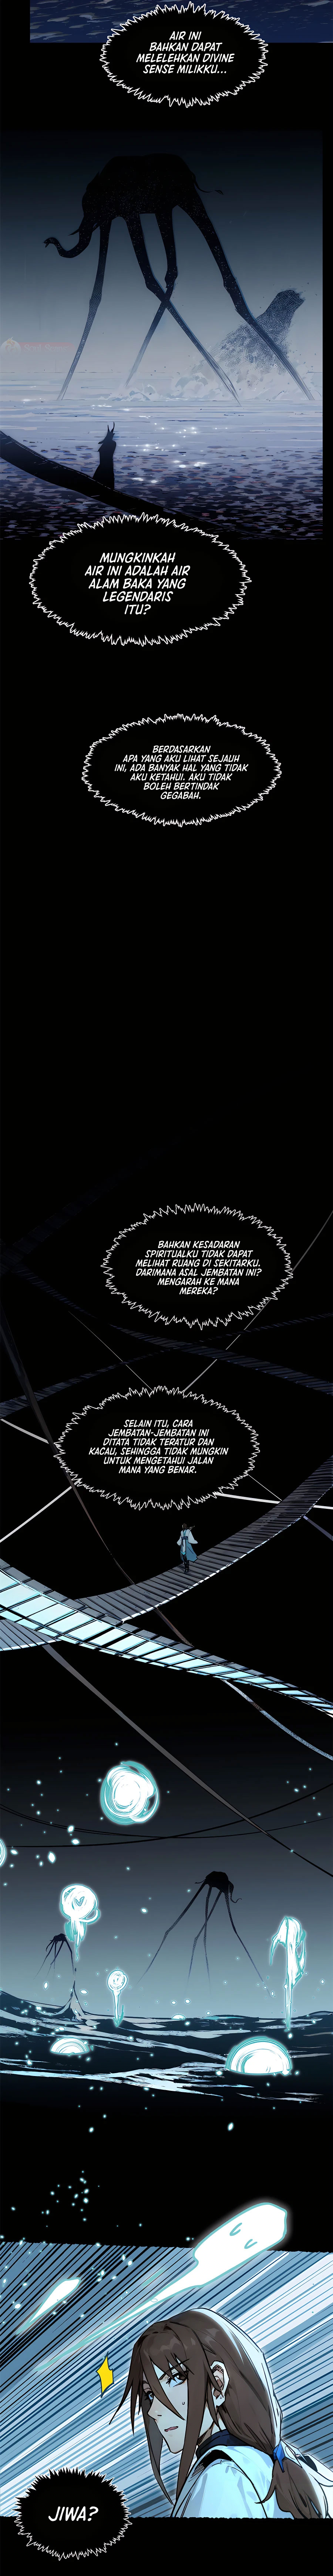 Dilarang COPAS - situs resmi www.mangacanblog.com - Komik top tier providence secretly cultivate for a thousand years 148.5 - chapter 148.5 149.5 Indonesia top tier providence secretly cultivate for a thousand years 148.5 - chapter 148.5 Terbaru 5|Baca Manga Komik Indonesia|Mangacan